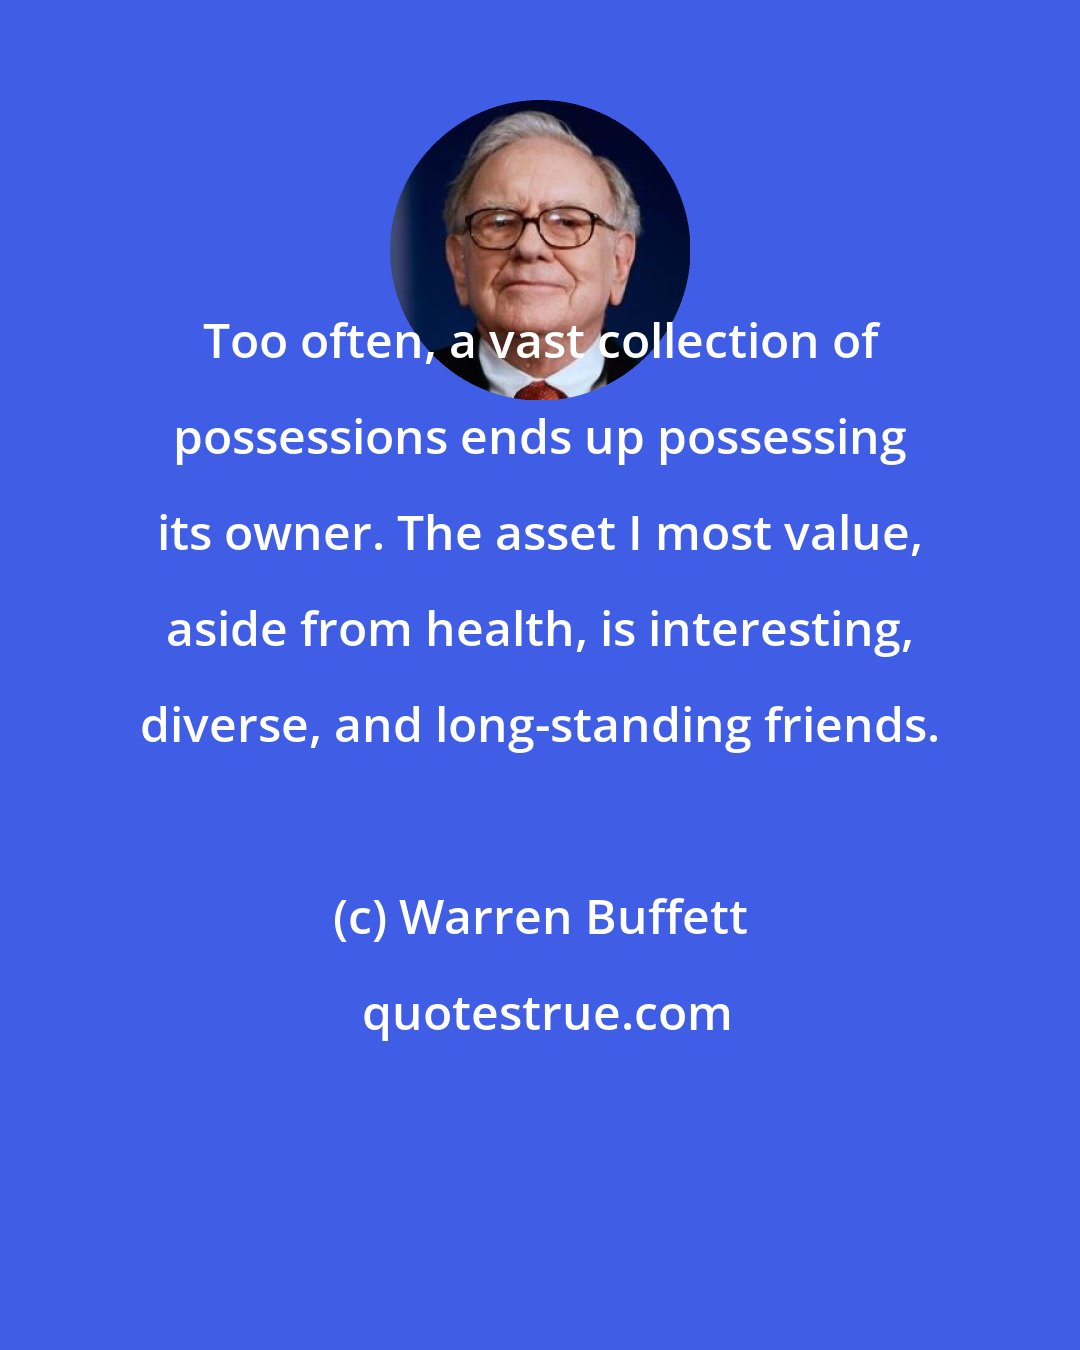 Warren Buffett: Too often, a vast collection of possessions ends up possessing its owner. The asset I most value, aside from health, is interesting, diverse, and long-standing friends.